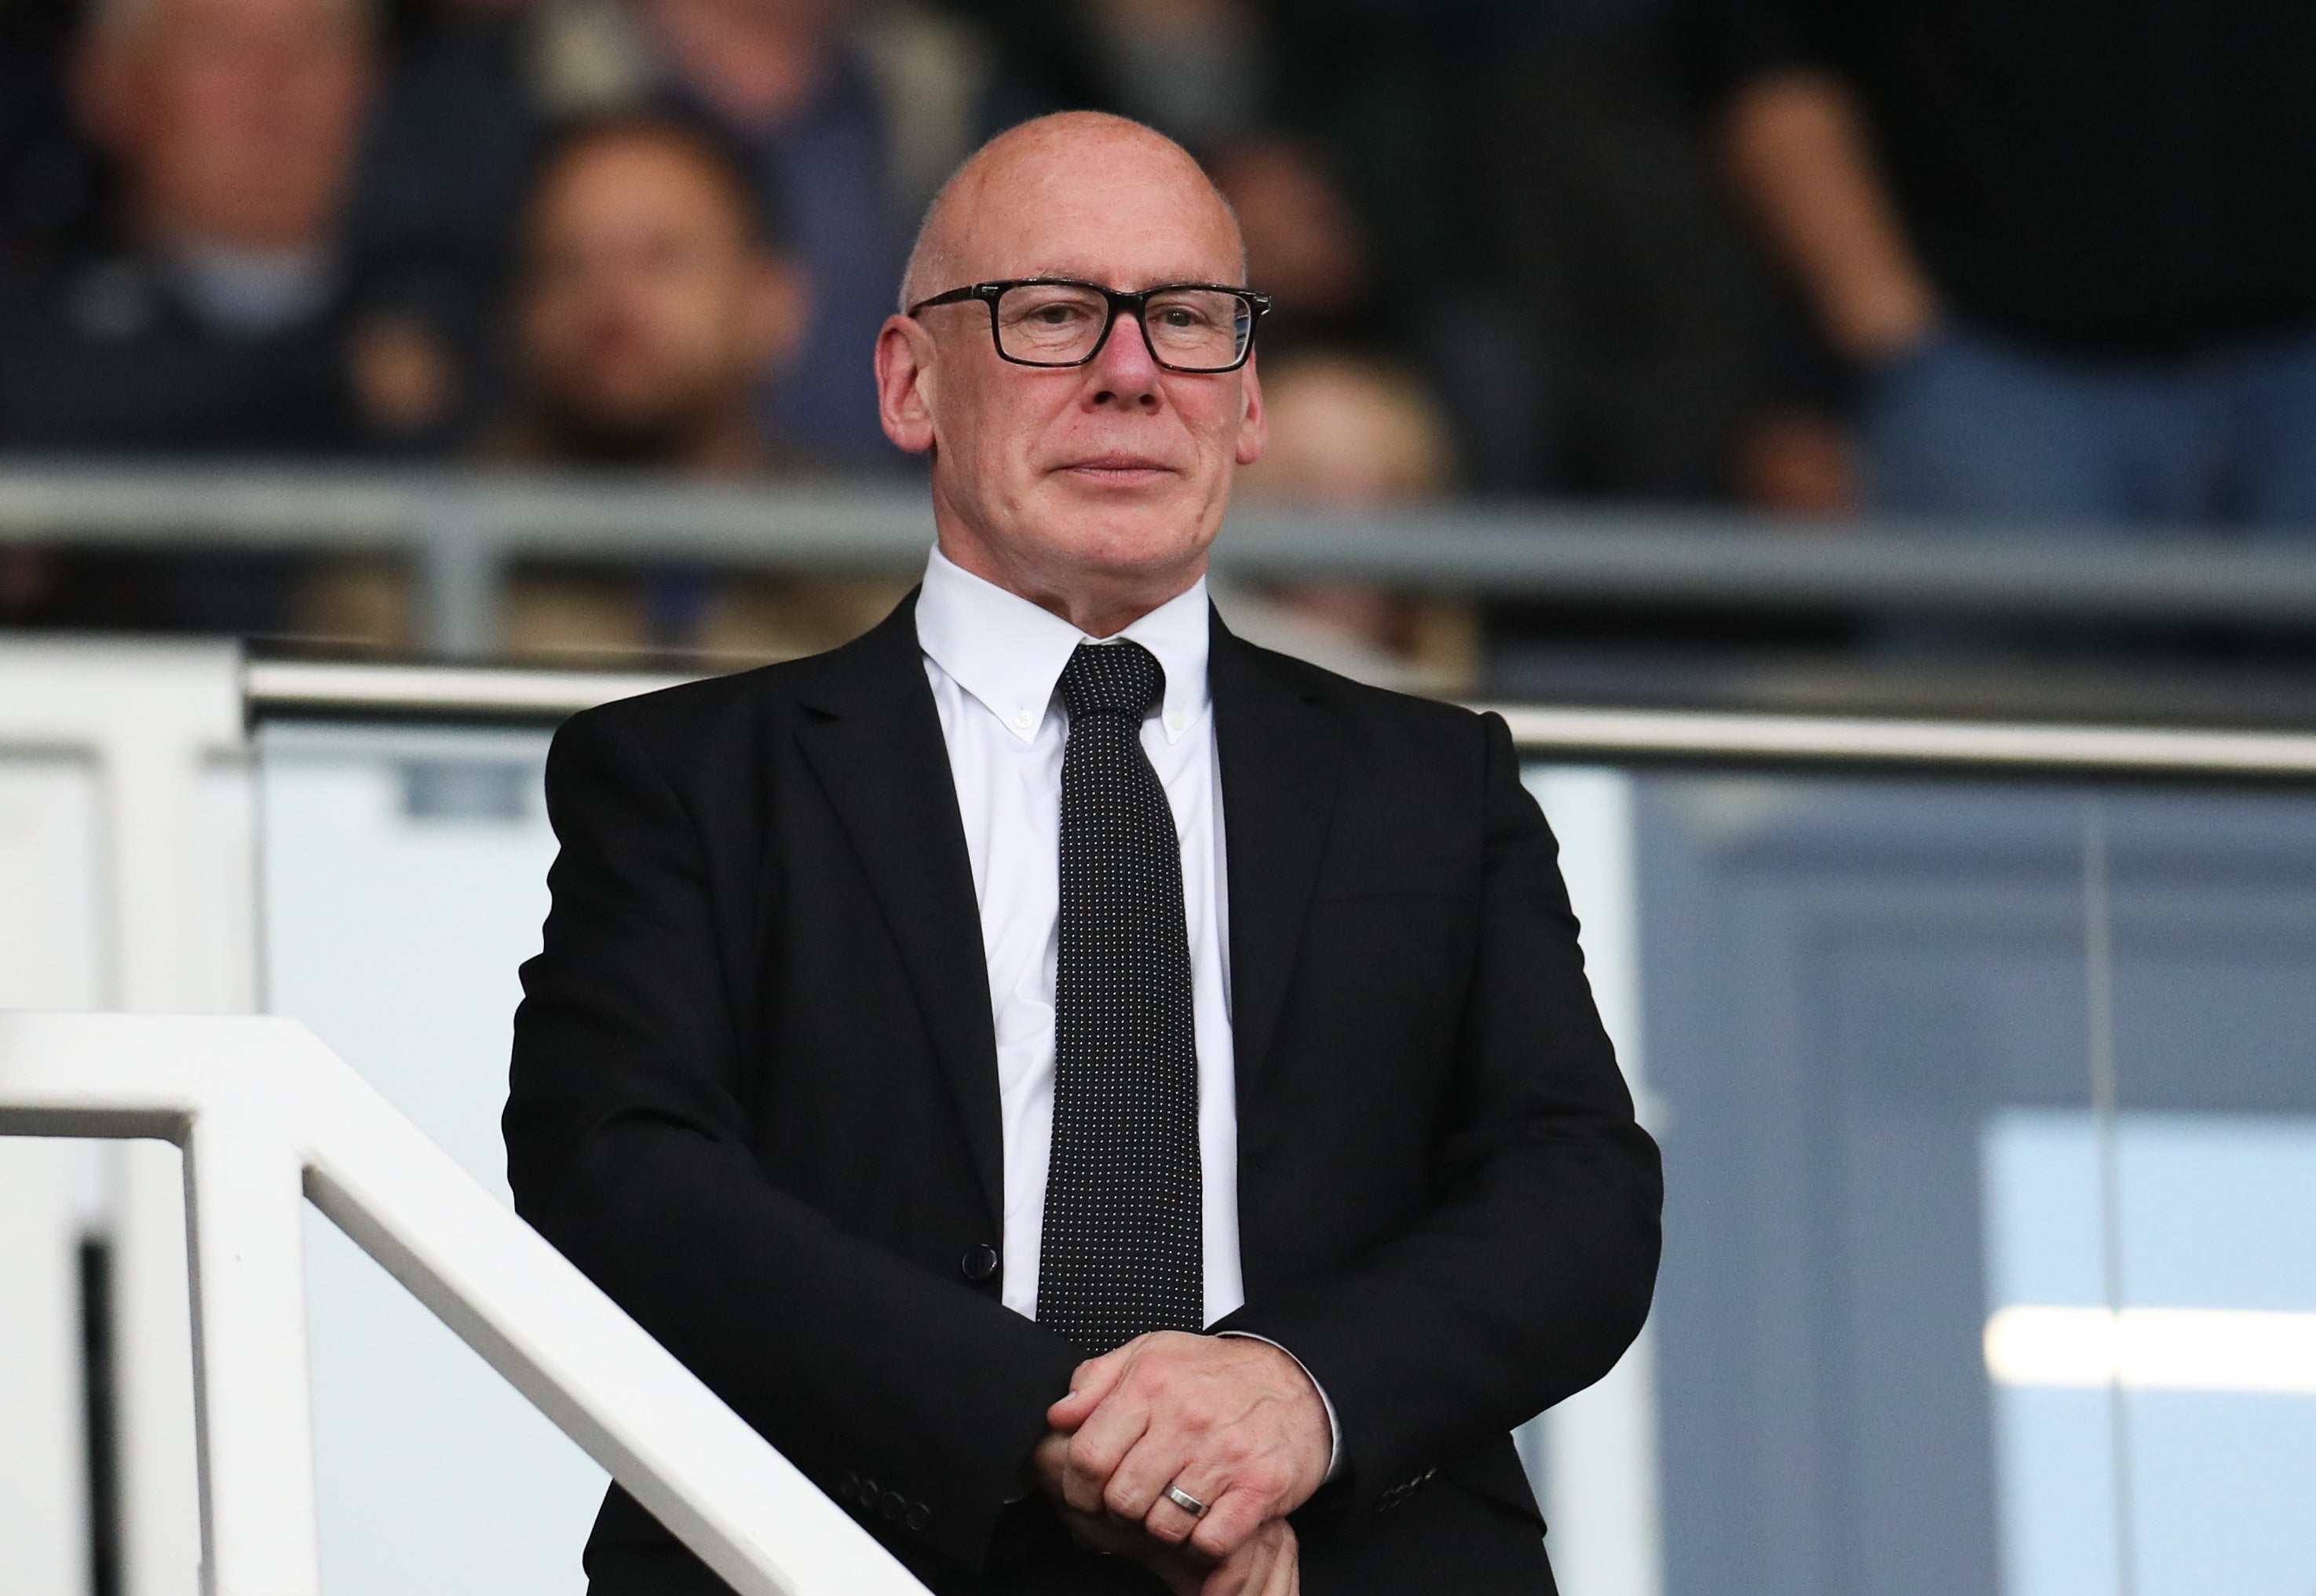 Middlesbrough reached an accord with former Derby owner Mel Morris over their legal claim against the club.